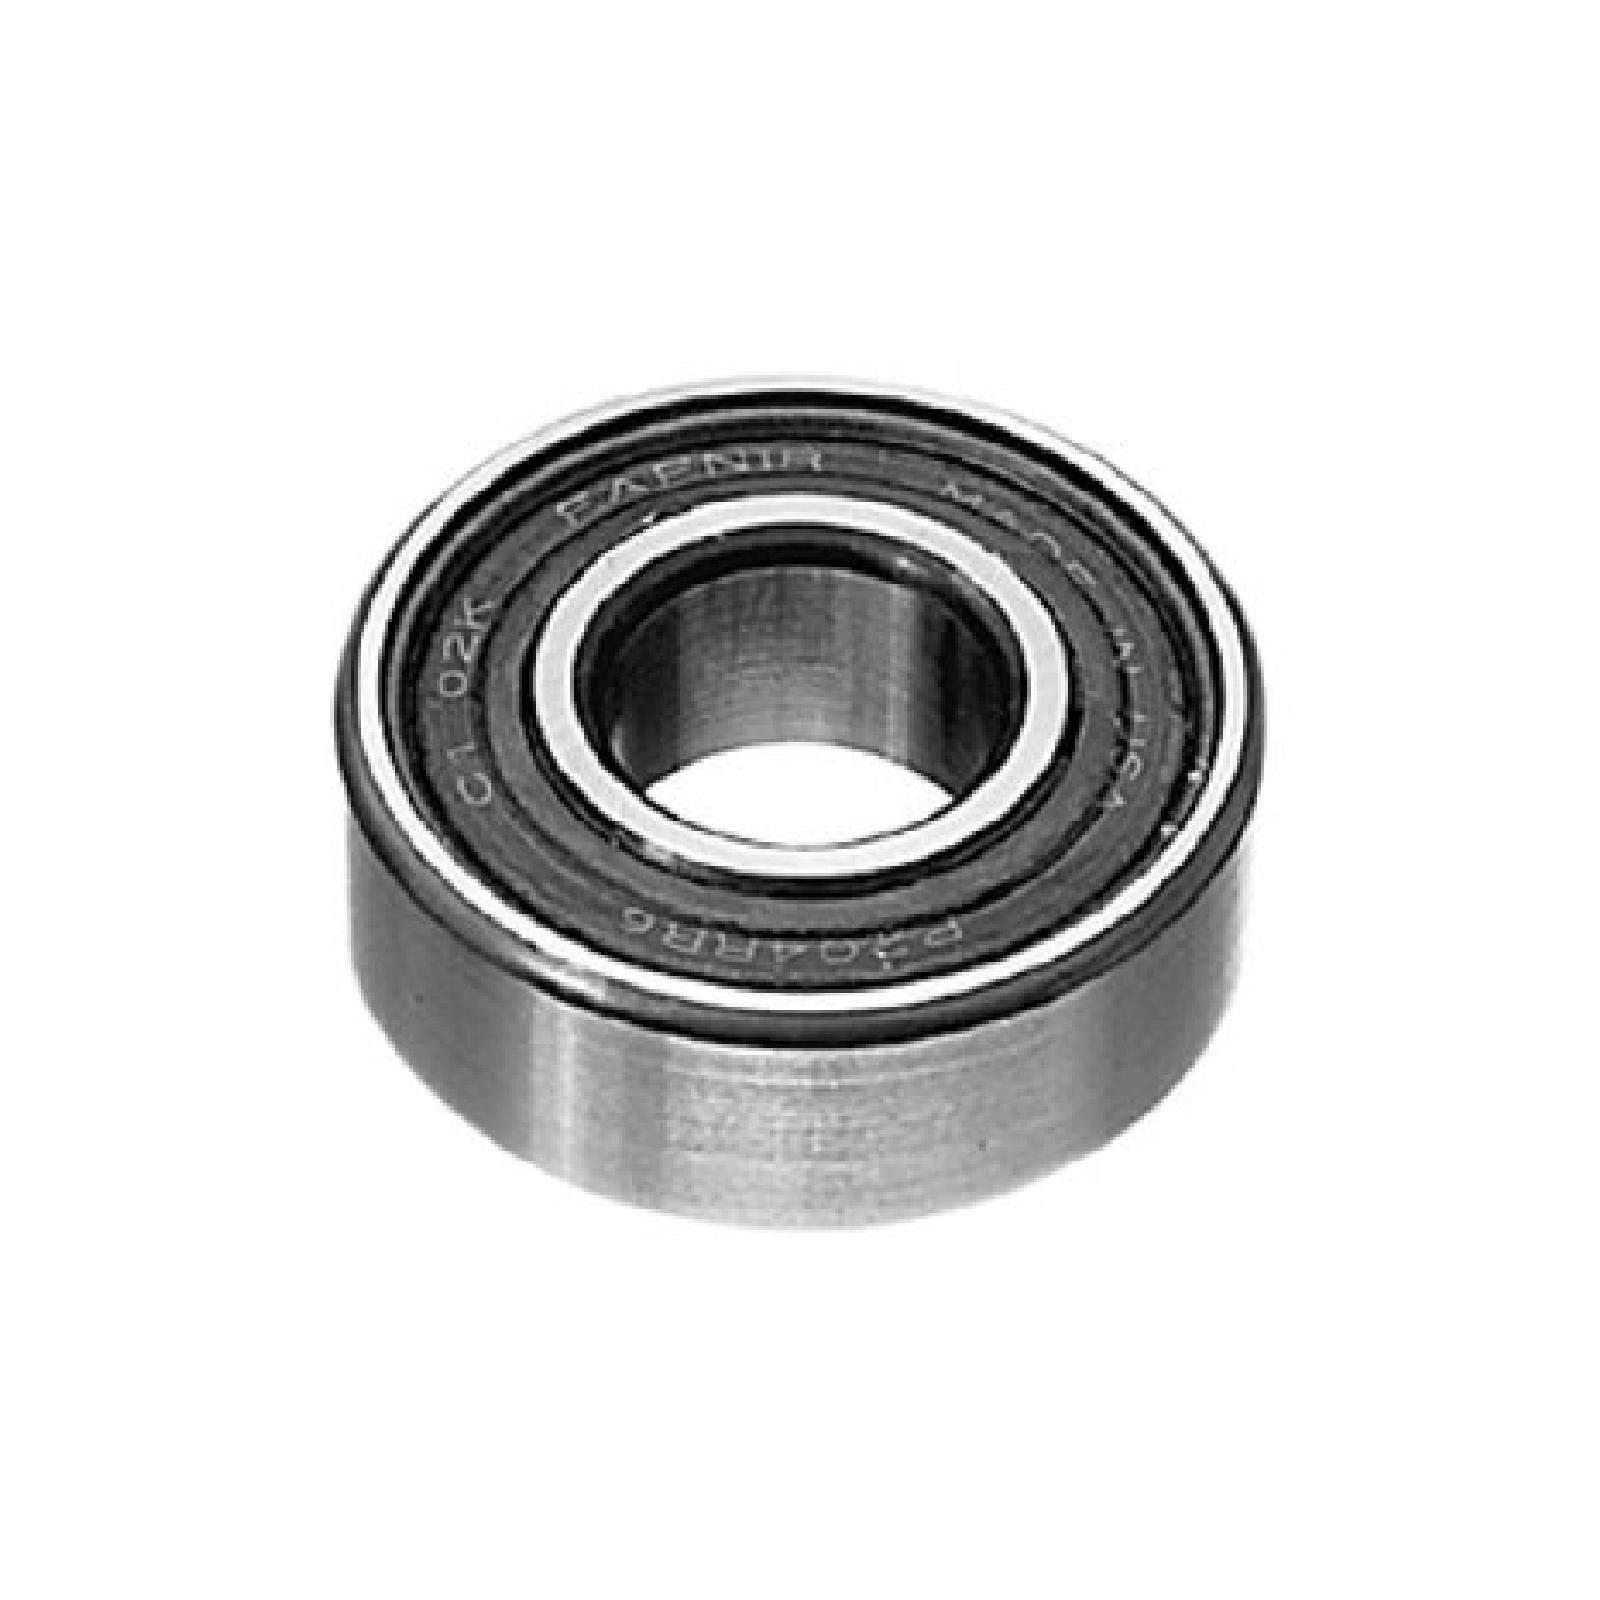 BEARING, BALL MAGNUM 6203 part# 45-256 by Oregon